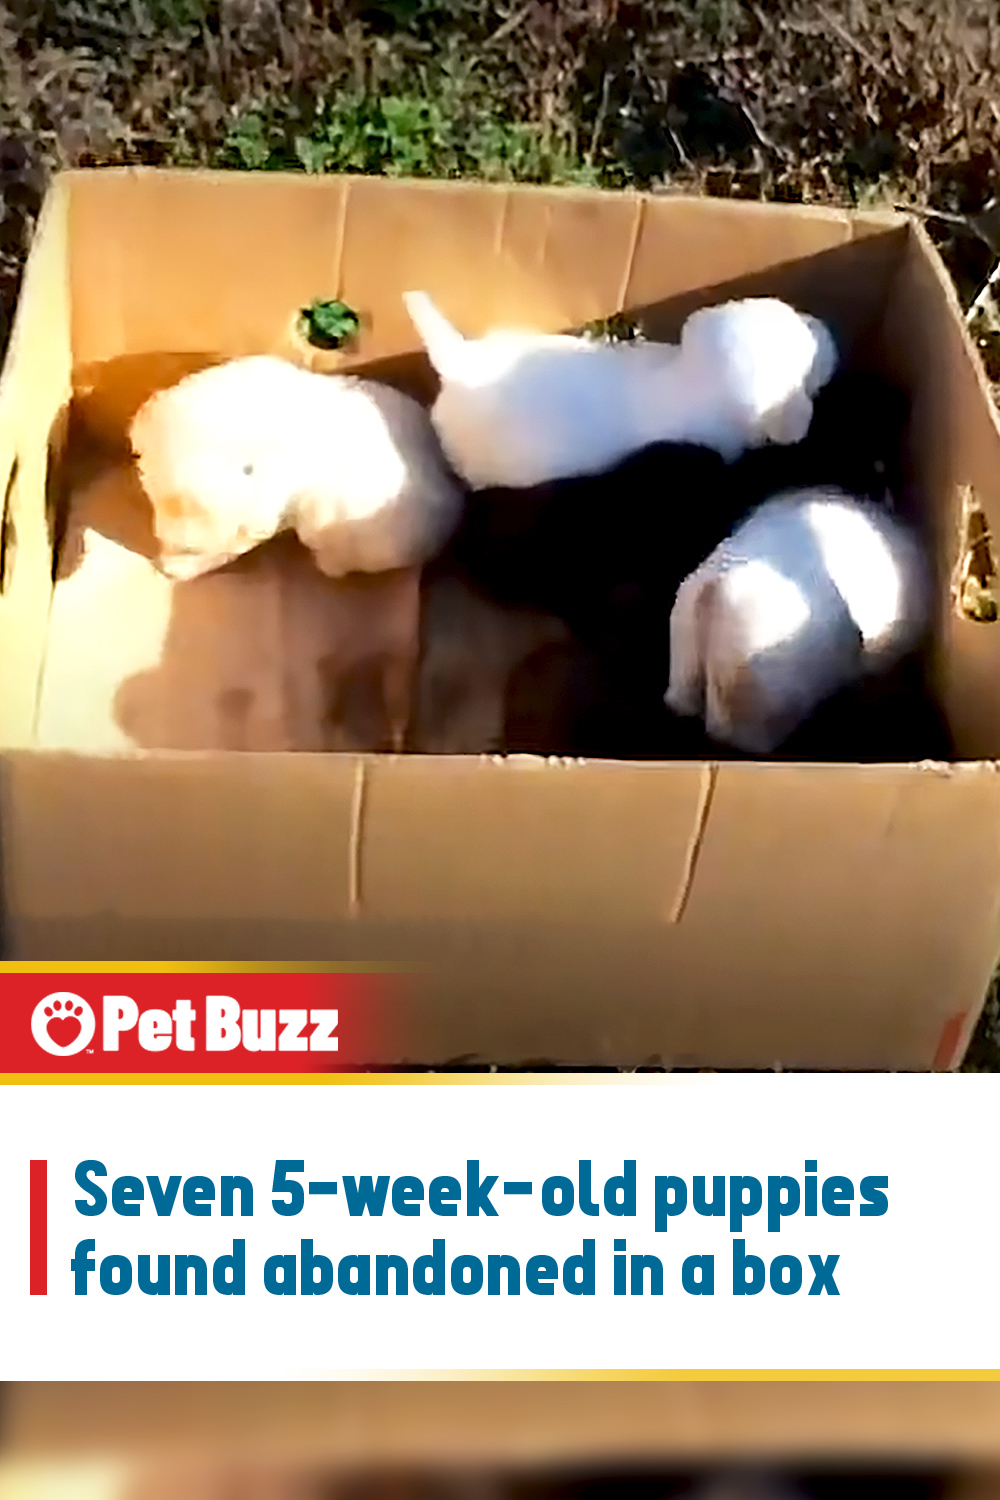 Seven 5-week-old puppies found abandoned in a box